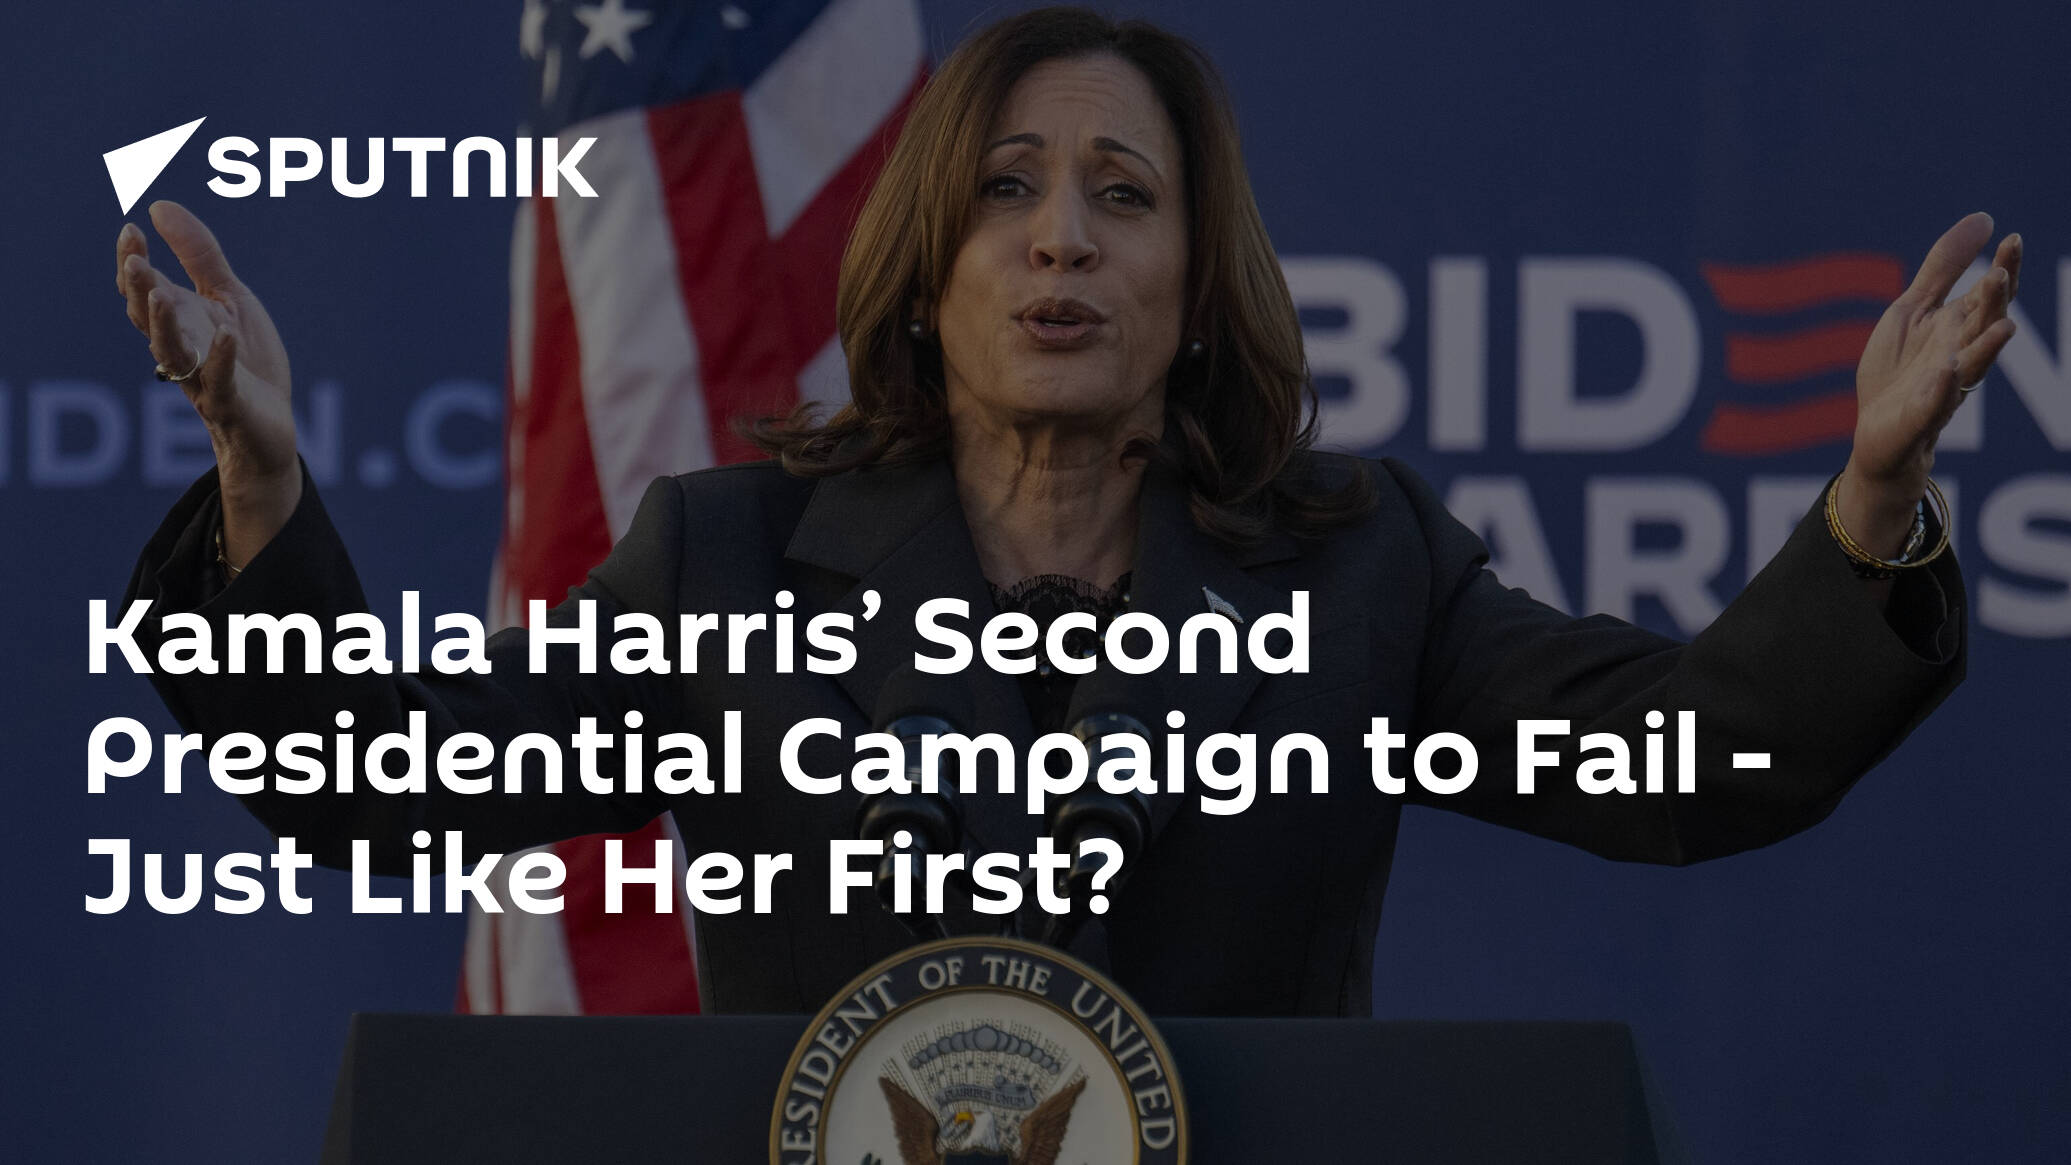 Kamala Harris’ Second Presidential Campaign to Fail - Just Like Her First?